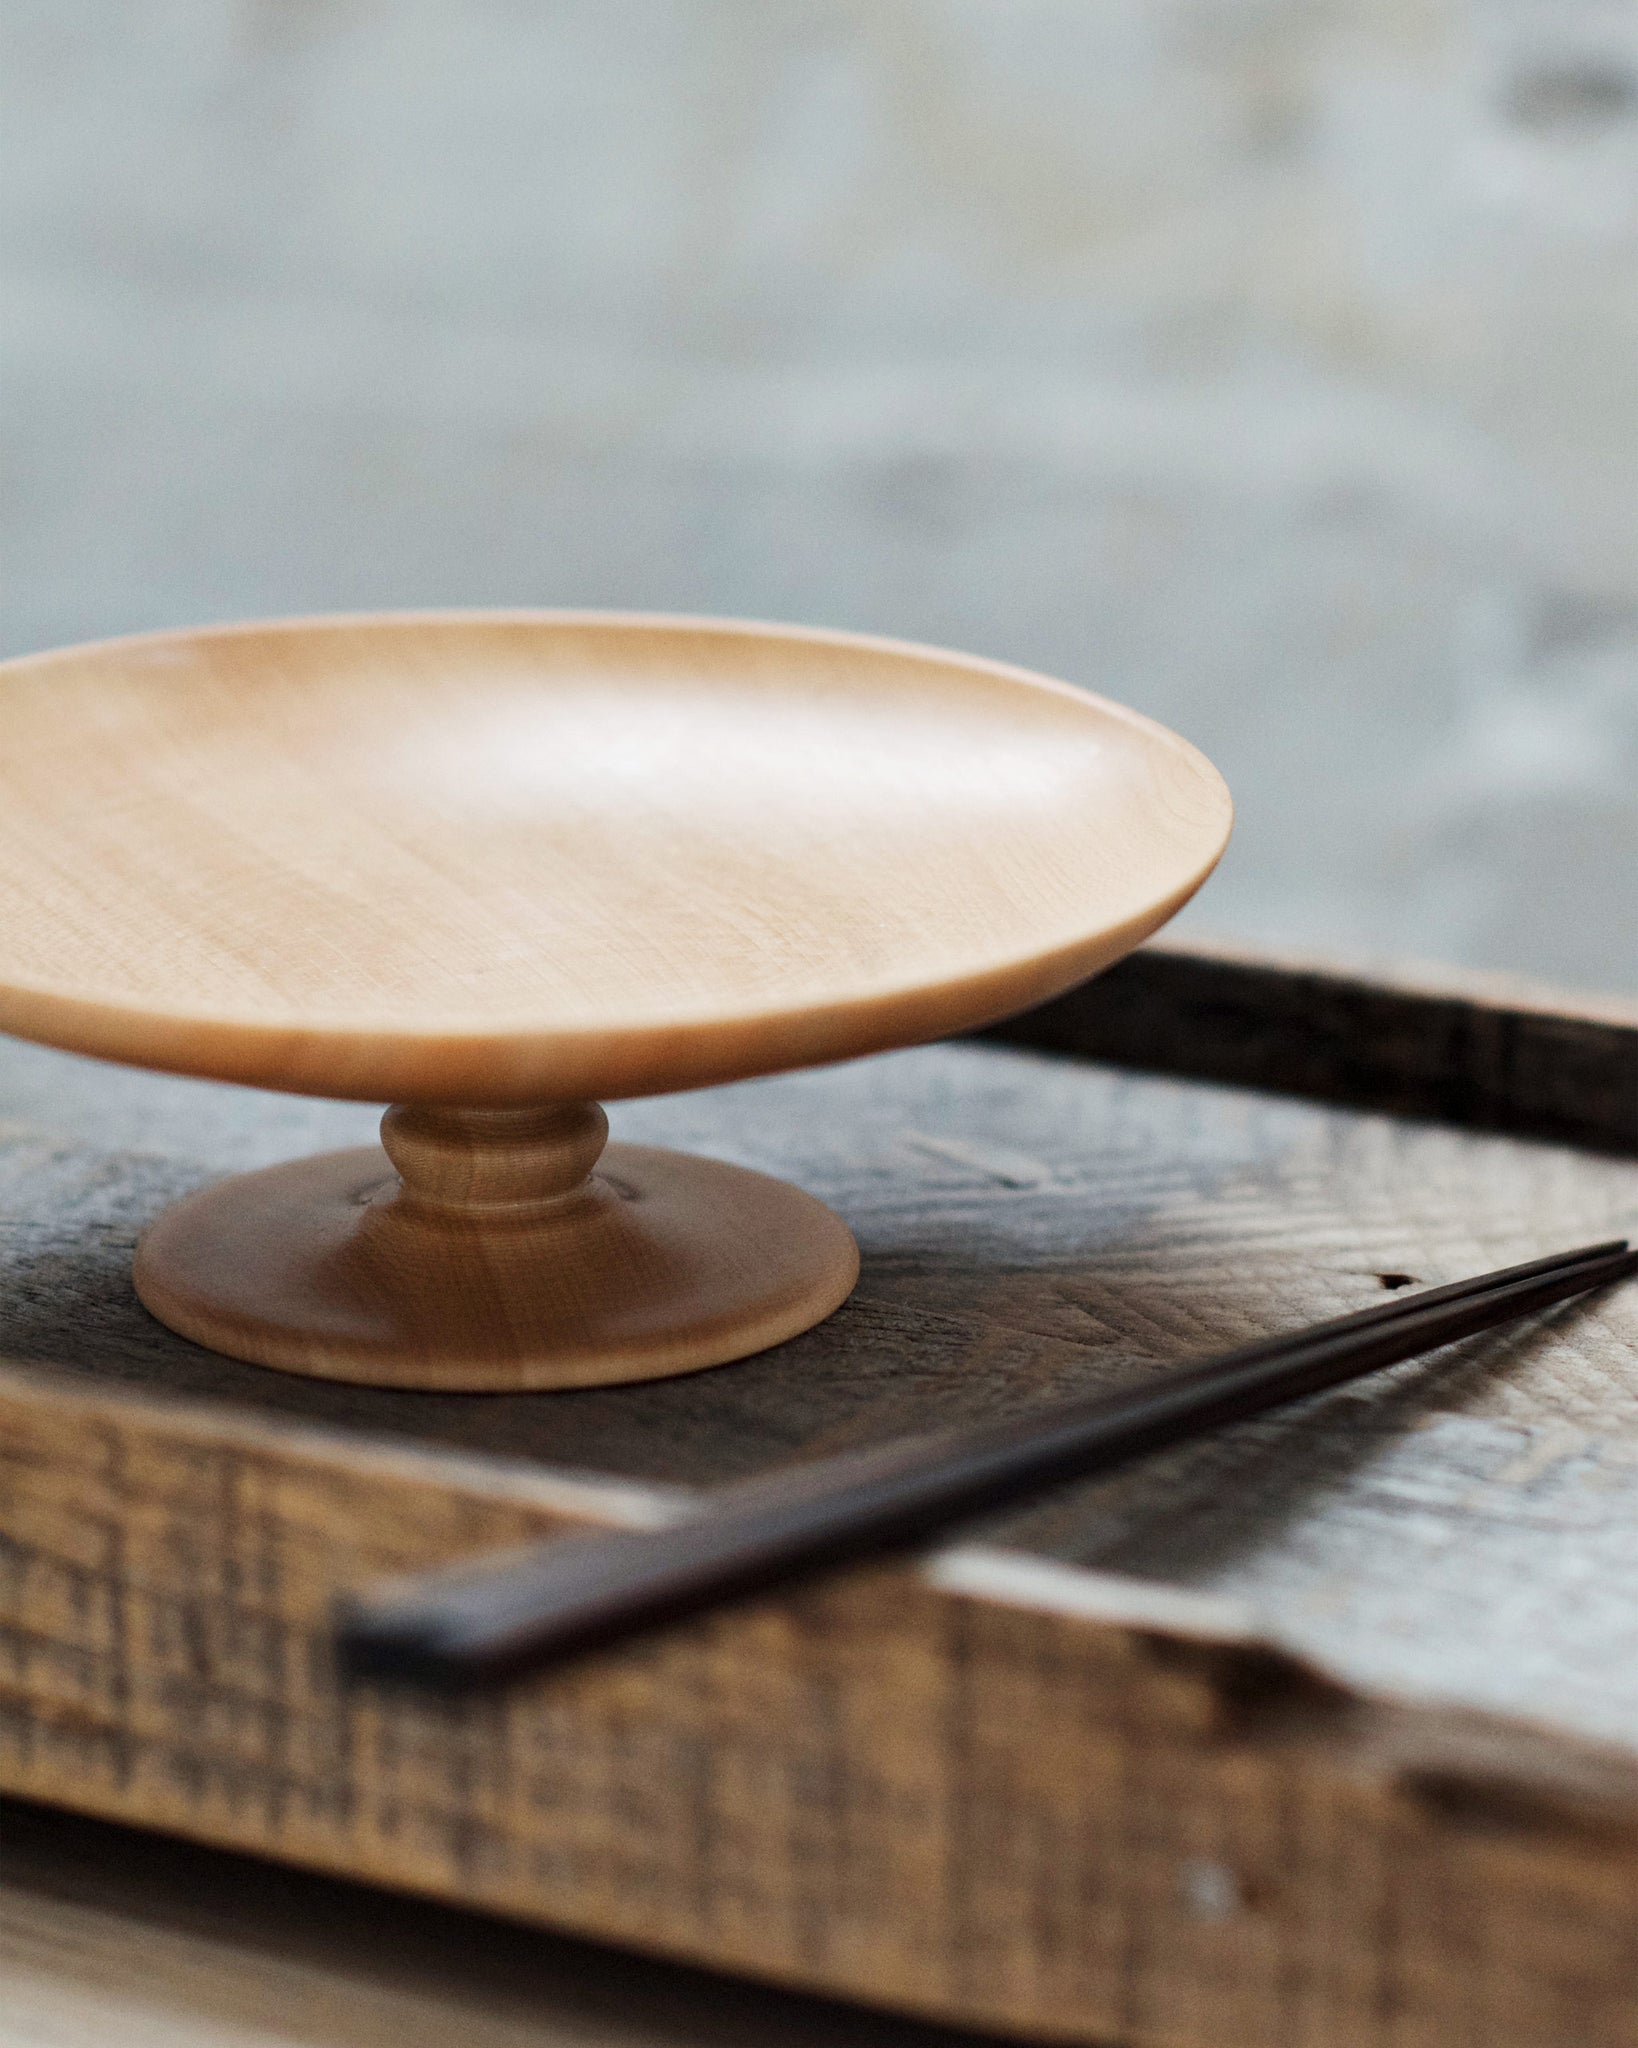 The footed plate and a pair of ebony wood chopsticks are placed on top of a dark wood tray side by side.